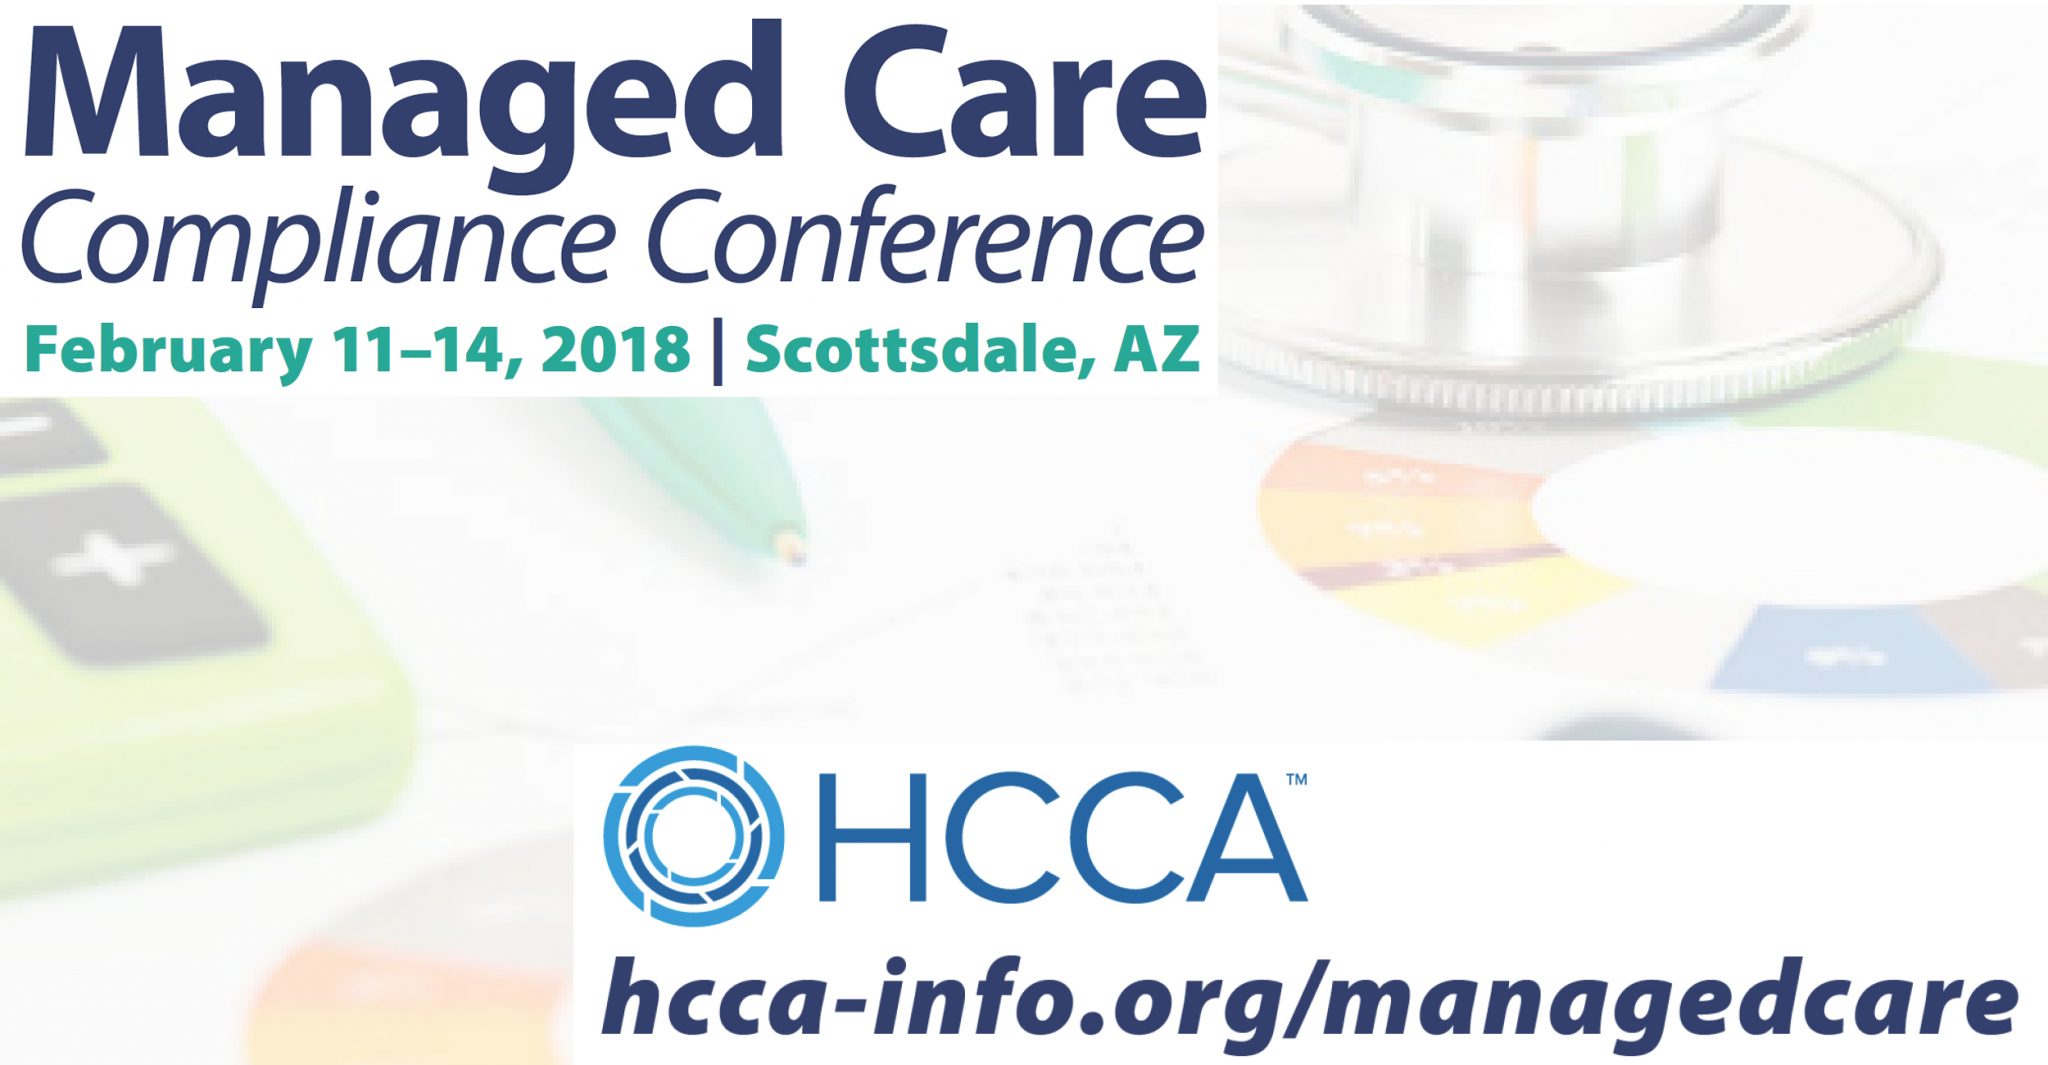 HCCA’s Managed Care Compliance Conference